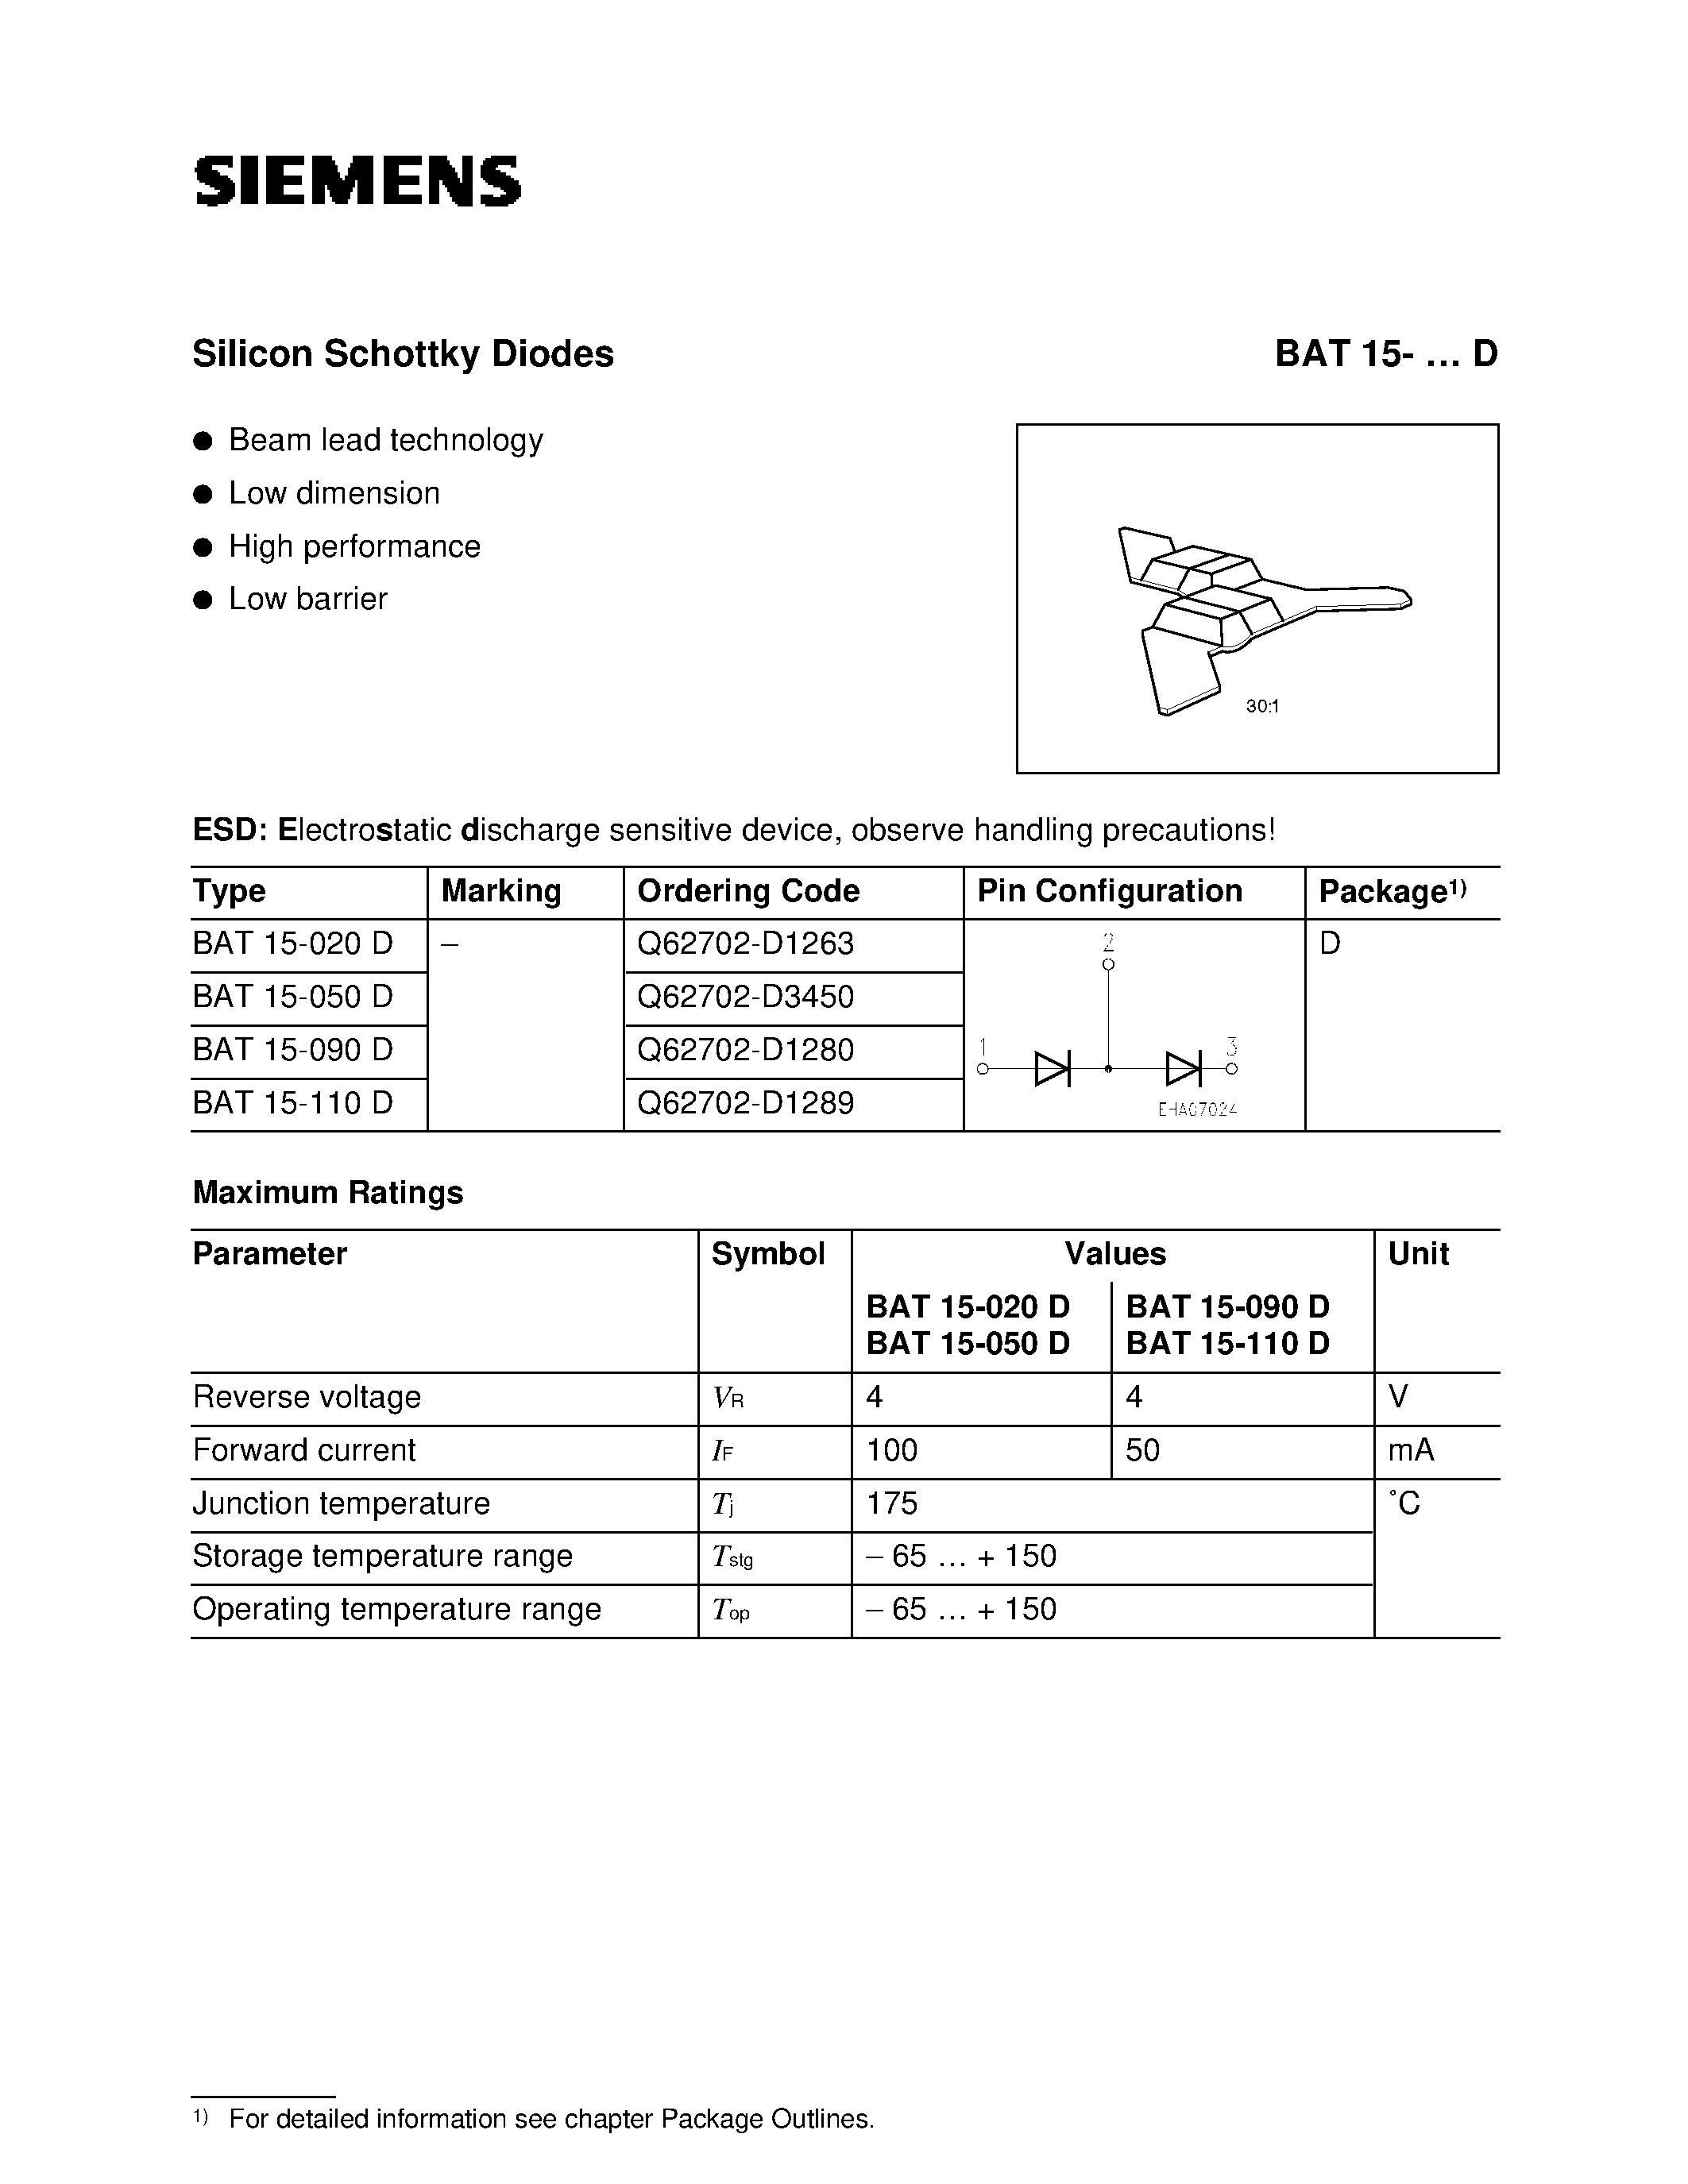 Datasheet BAT15-090D - Silicon Schottky Diodes (Beam lead technology Low dimension High performance Low barrier) page 1